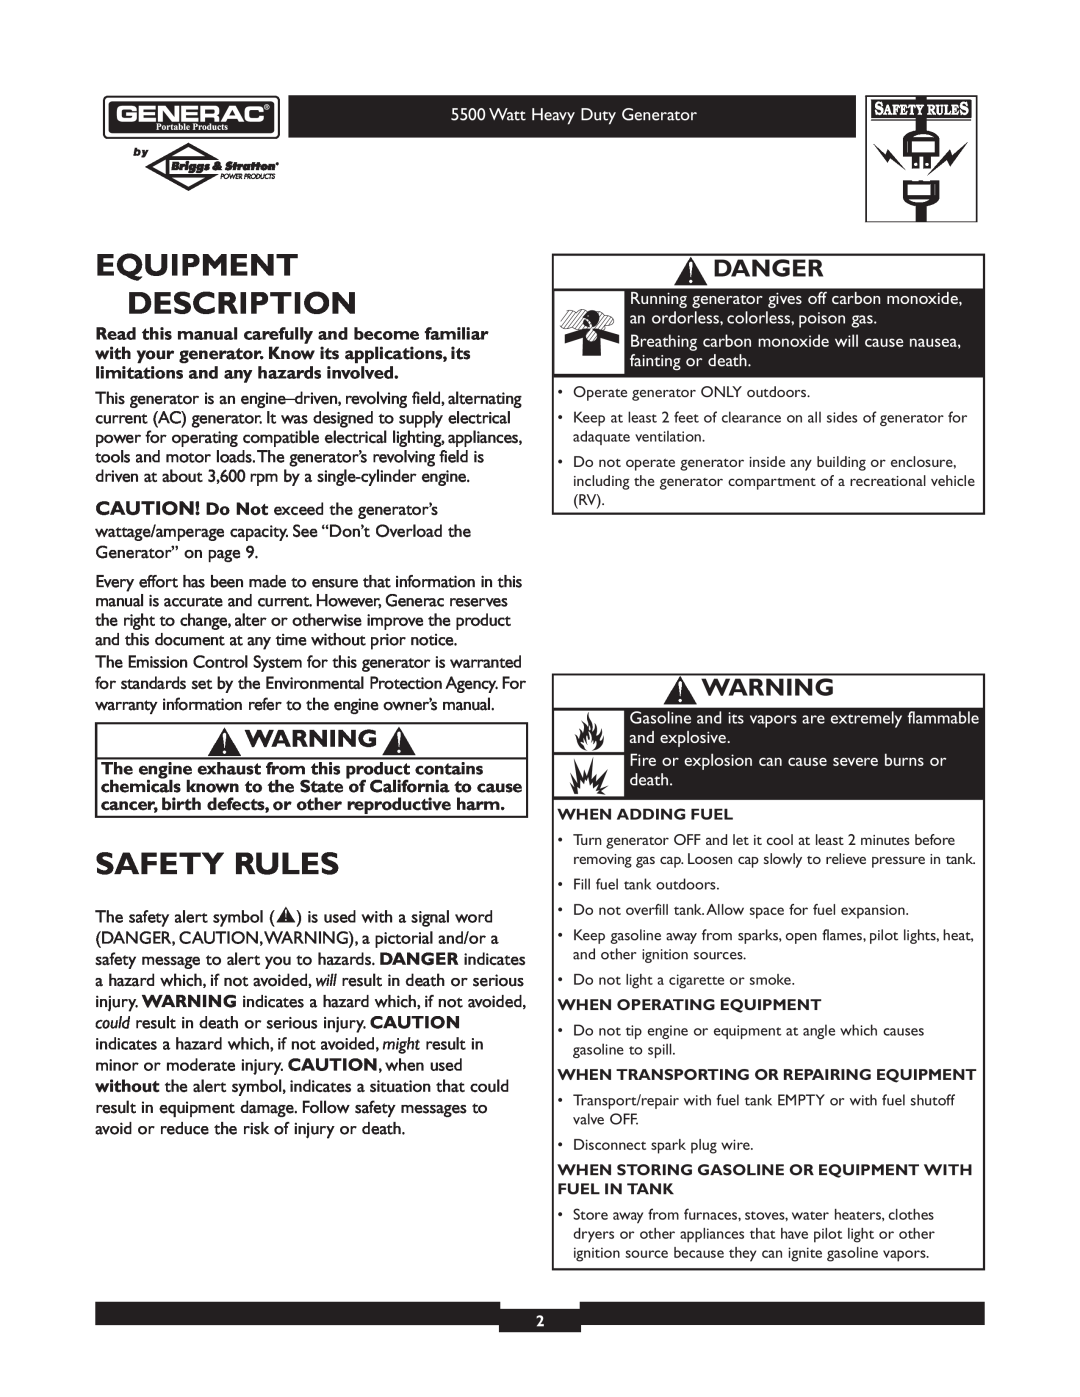 Generac 1654-0 owner manual Equipment Description, Safety Rules, Danger, When Adding Fuel, When Operating Equipment 